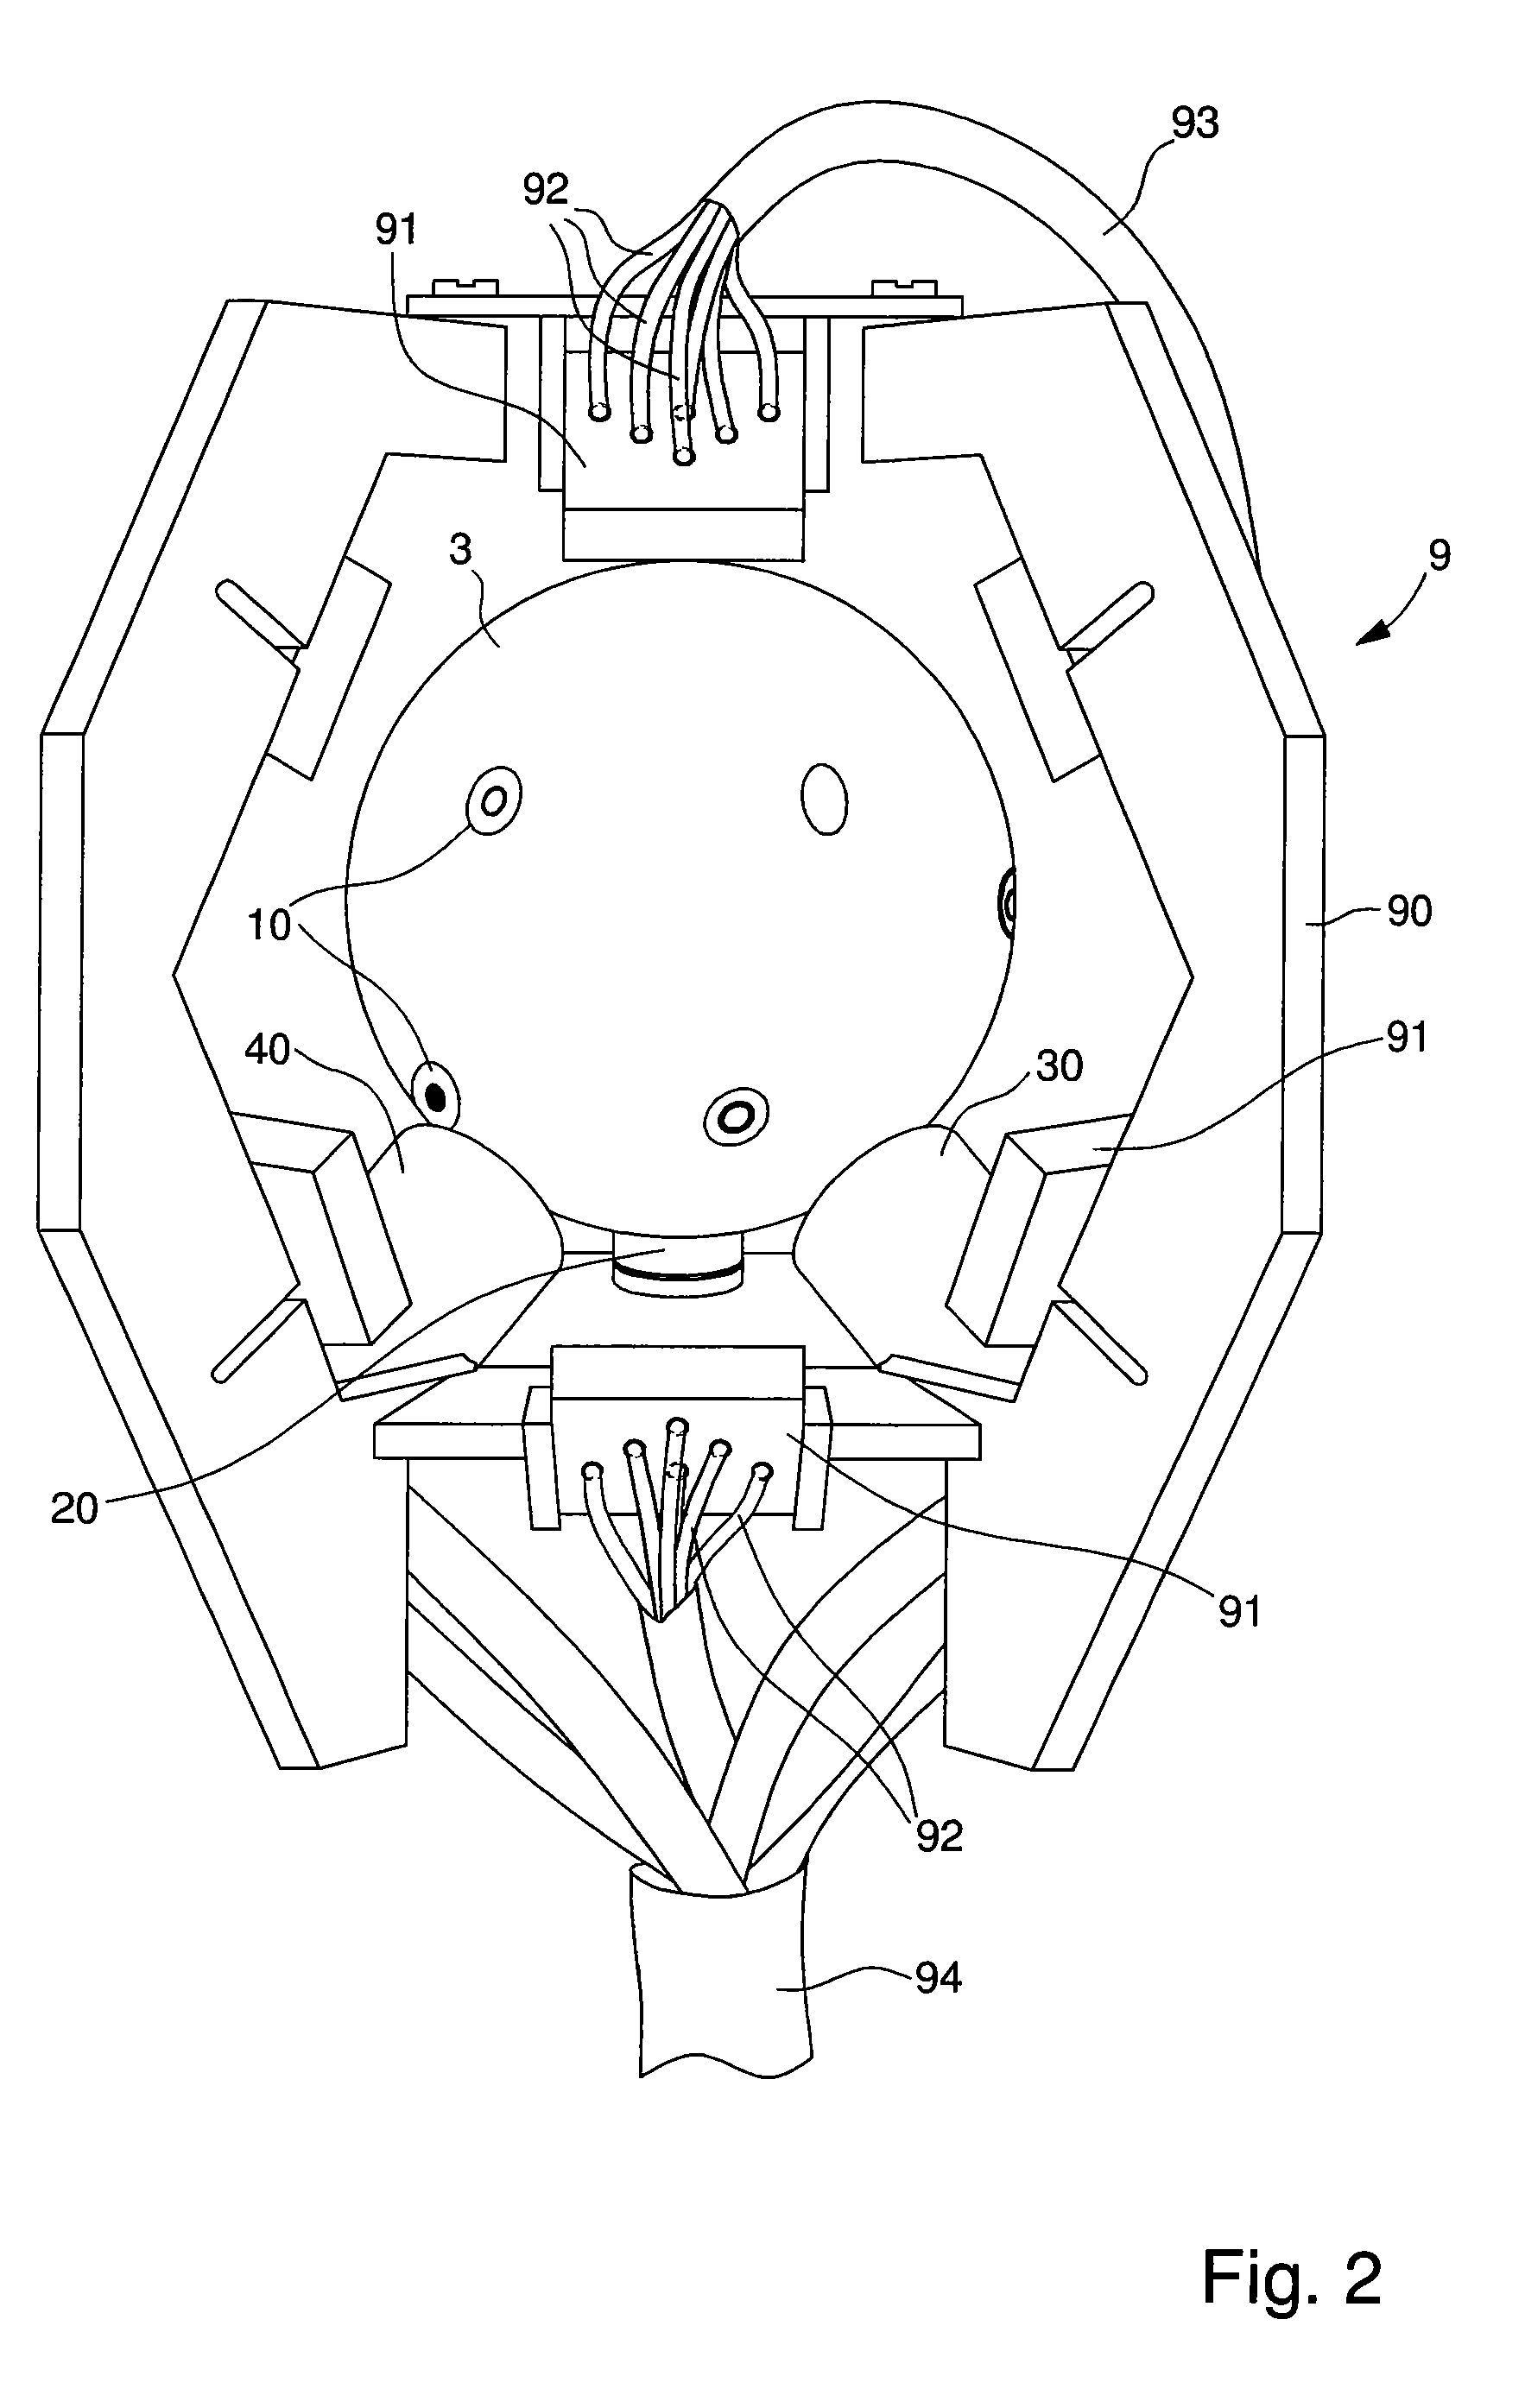 System for optical recognition of the position and movement of an object on a positioning device